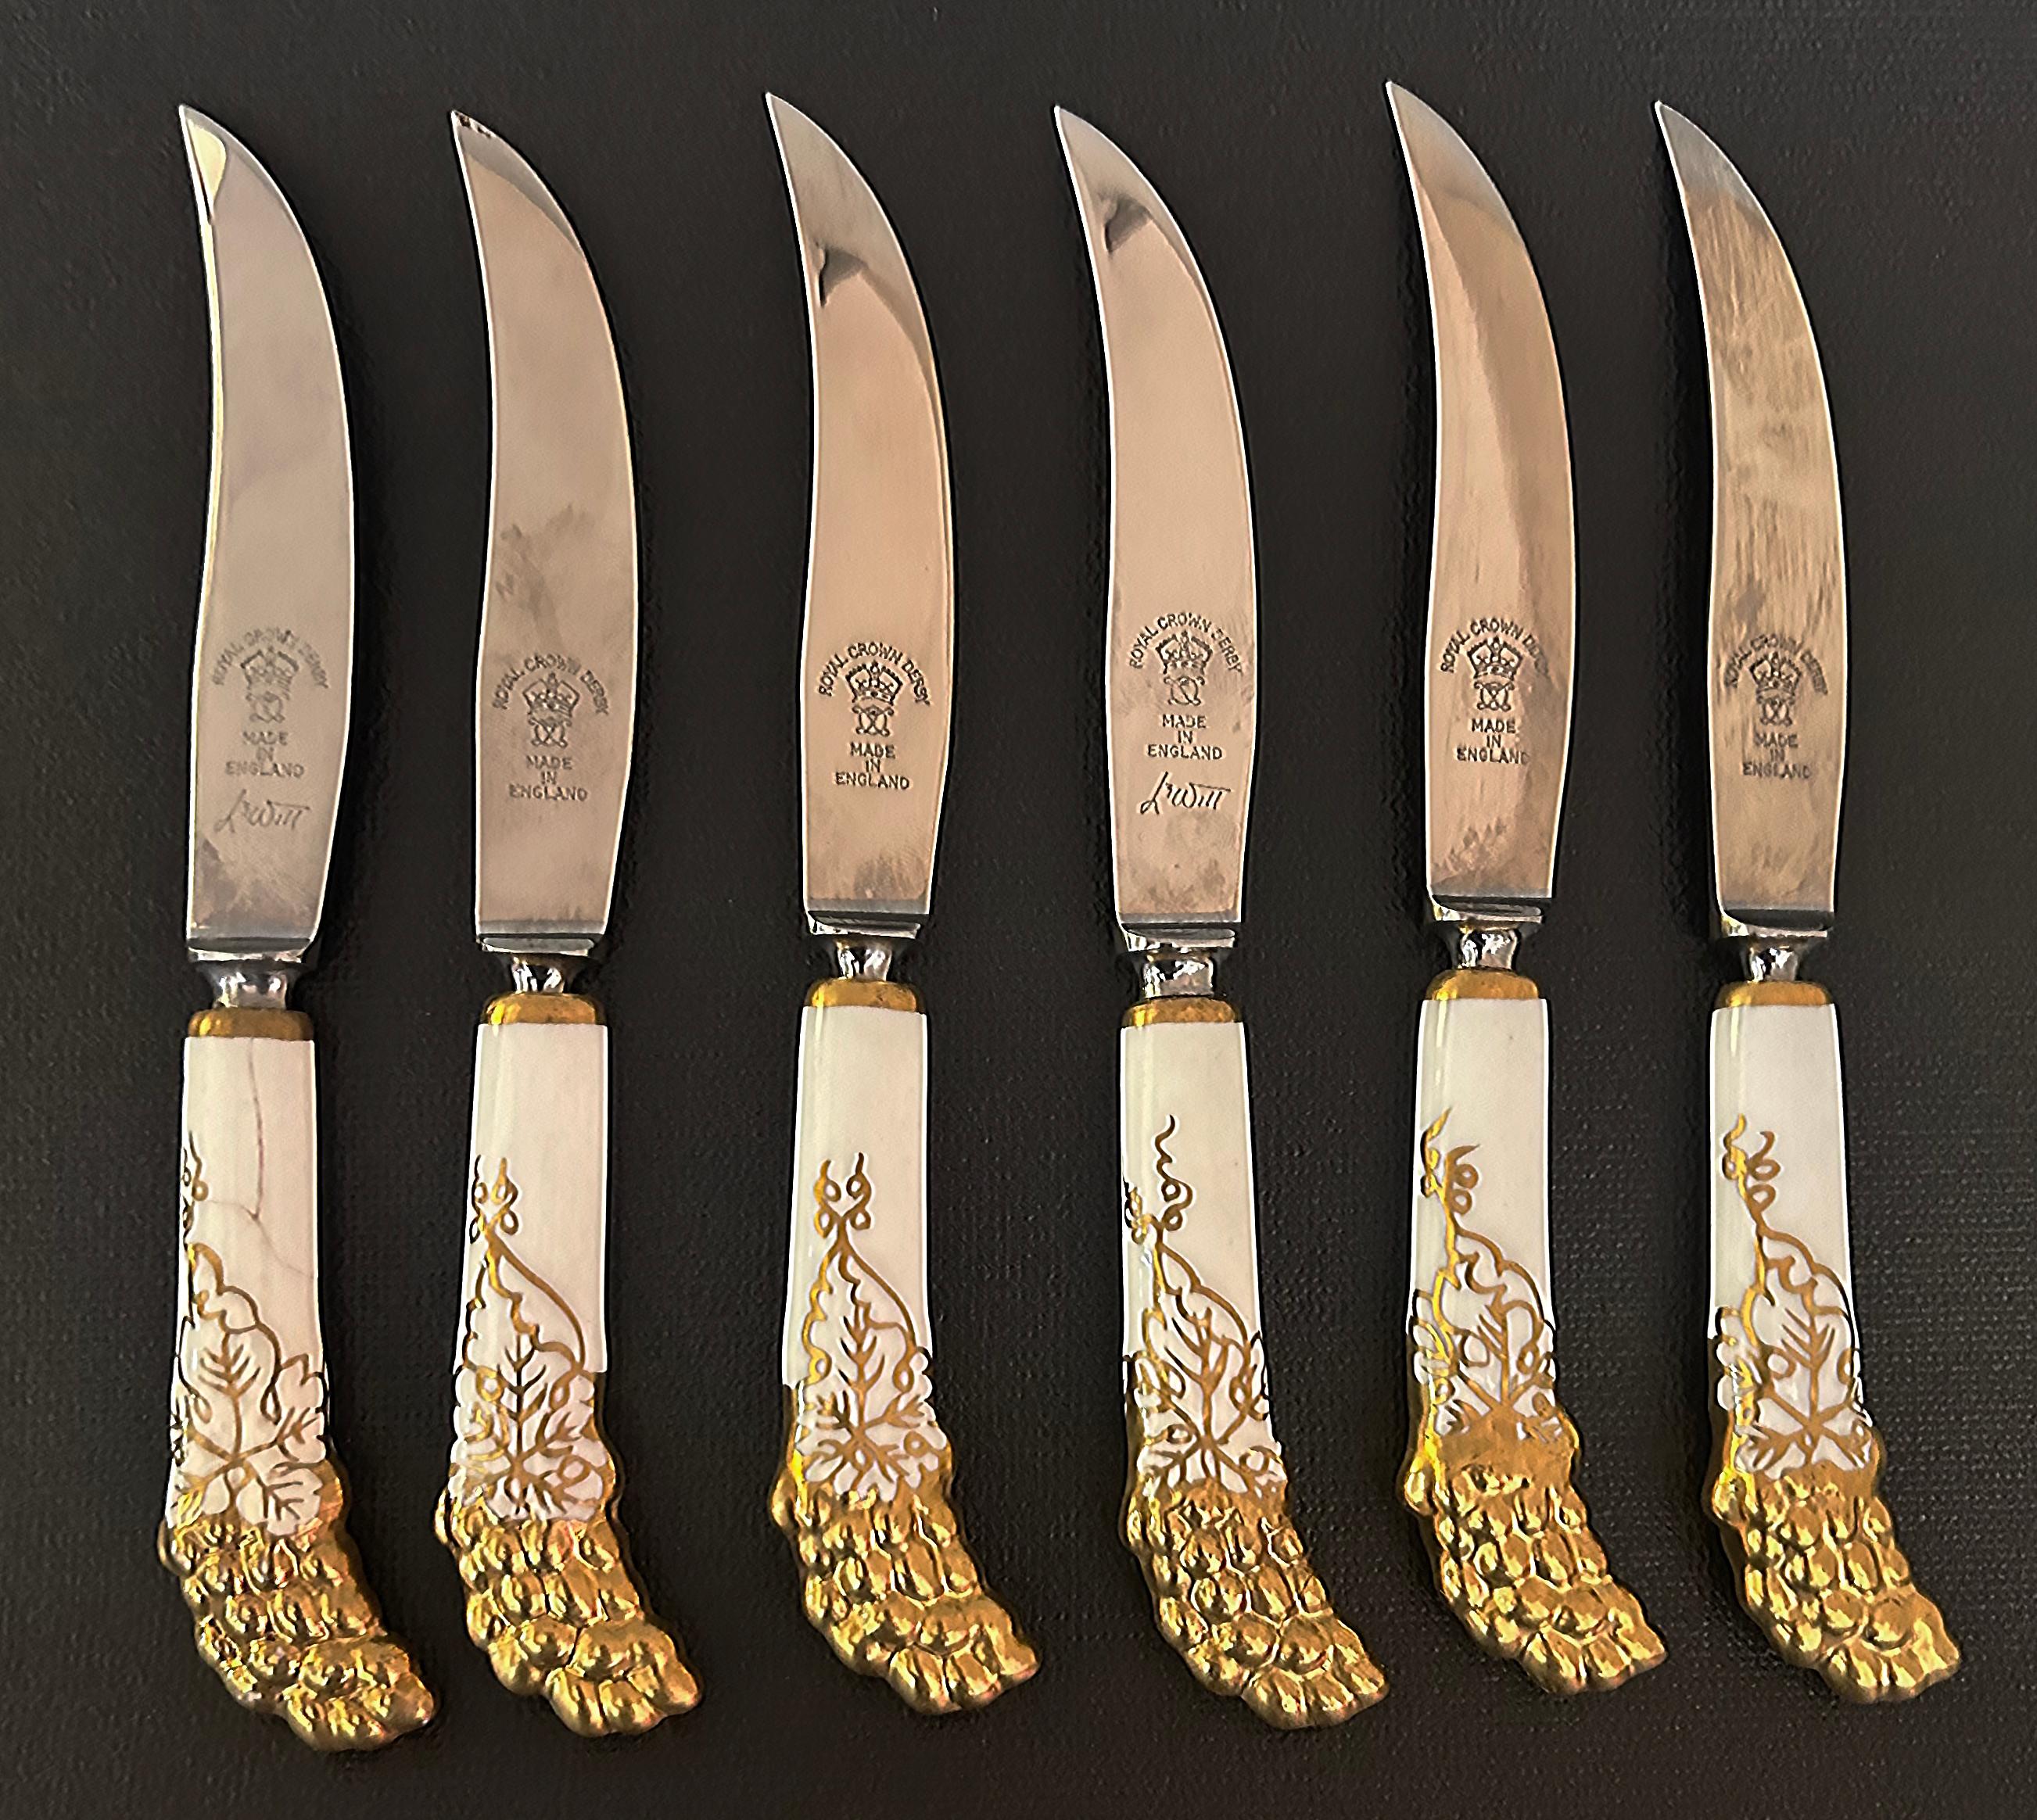 Royal Crown Derby Porcelain, Stainless Fruit Knives Set, Leather Box

Offered for sale is a set of six Royal Crown Derby gilt porcelain and stainless steel fruit knives in their original fitted tooled leather box. Made in England, this lovely set of